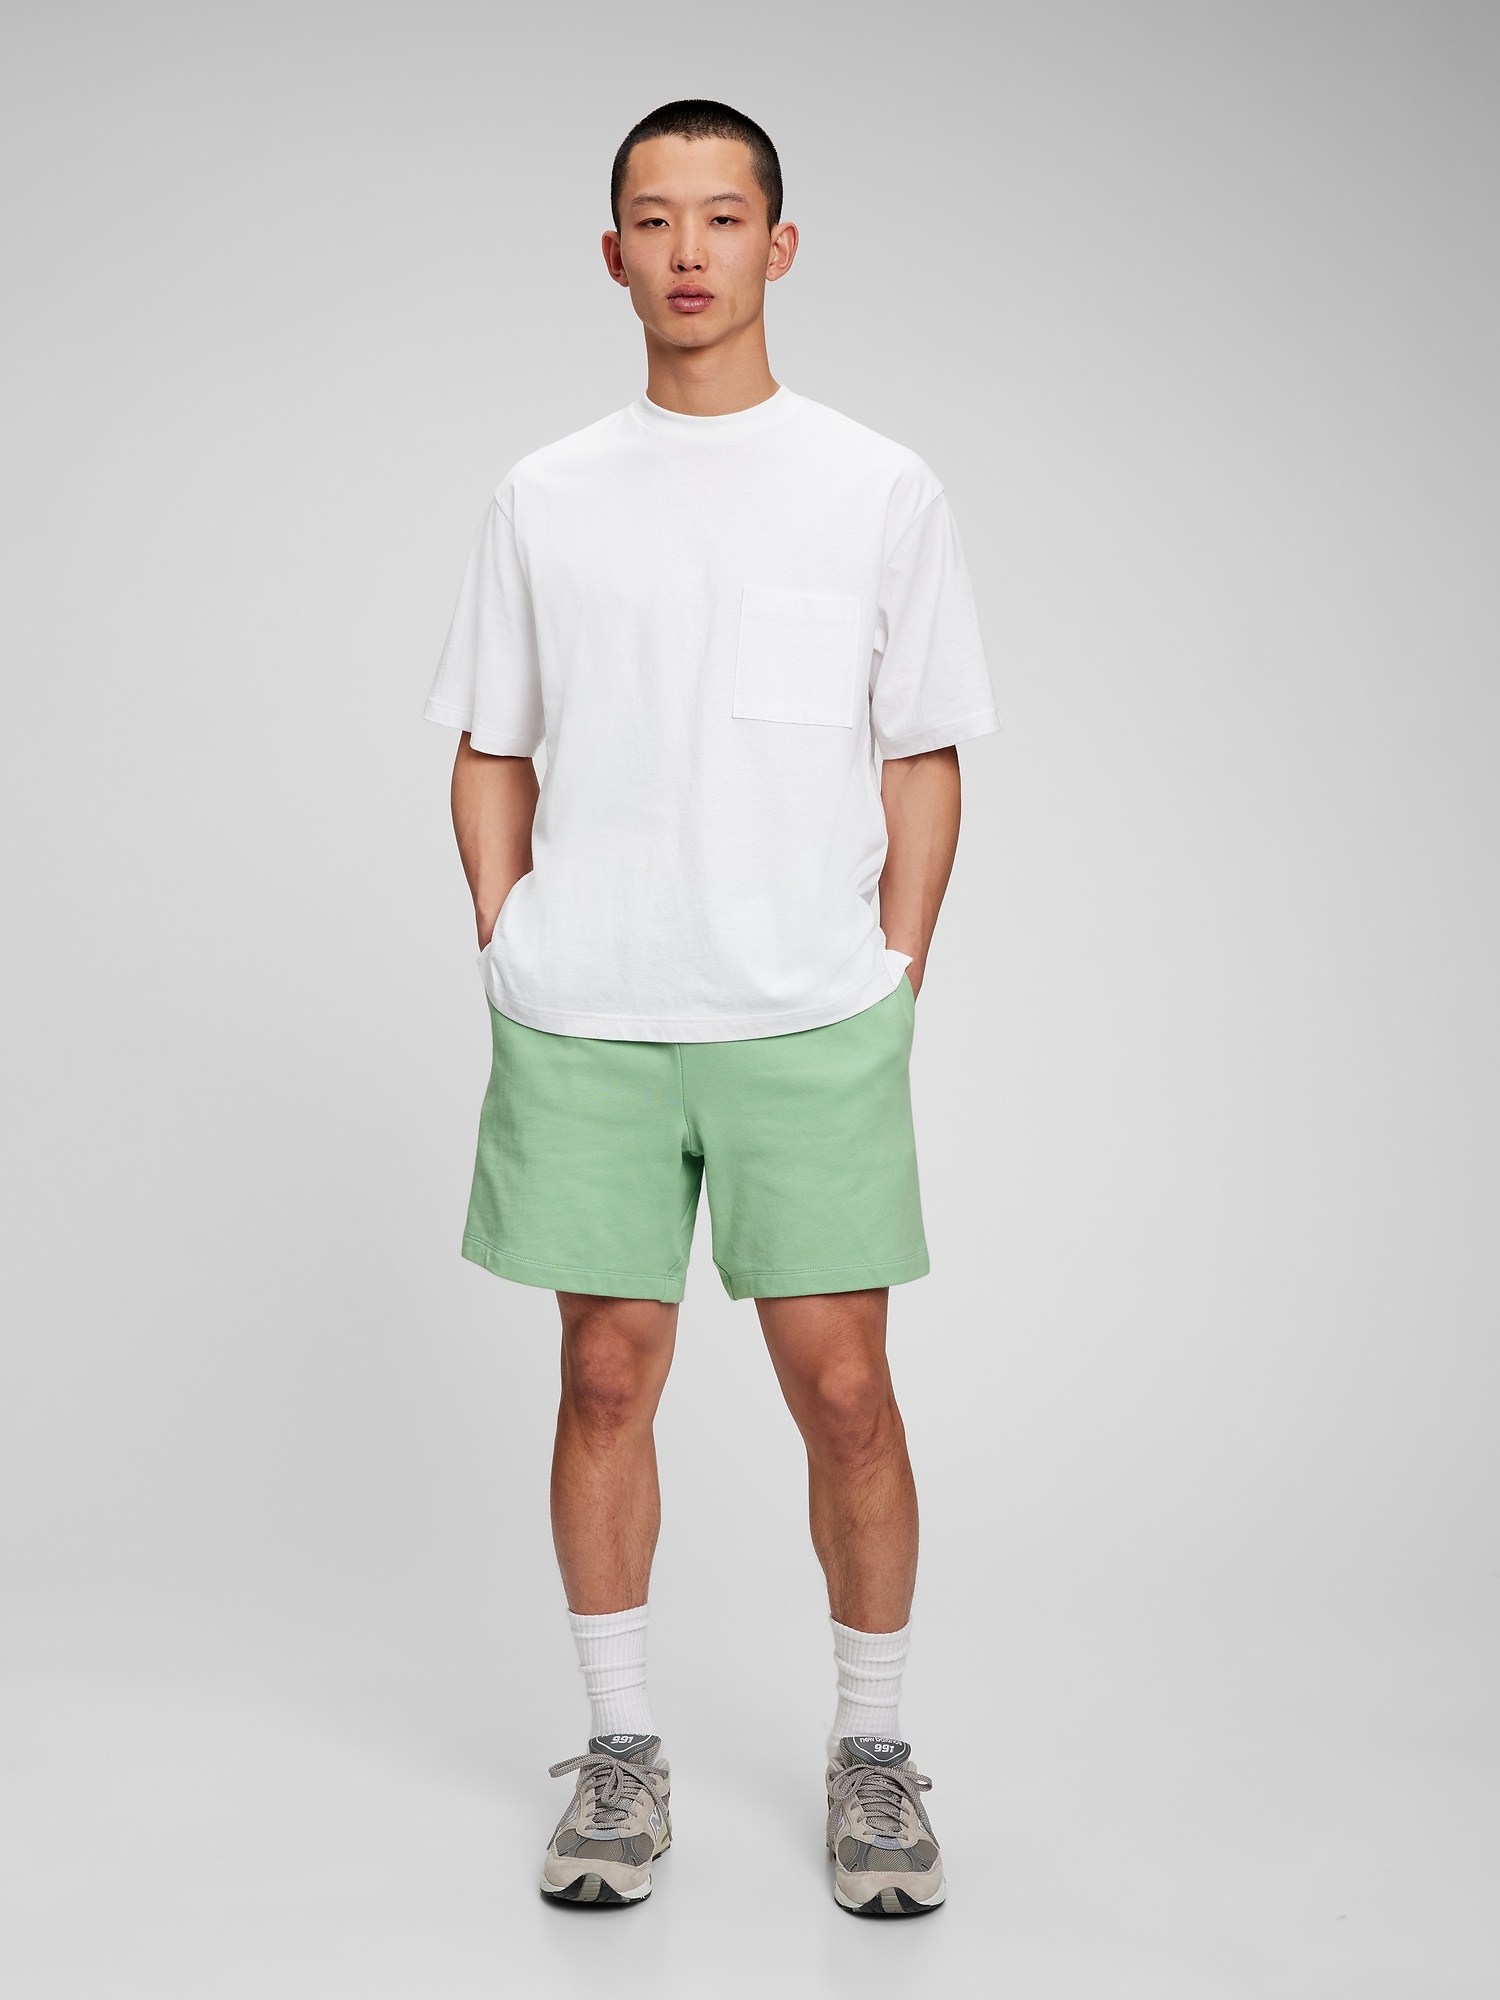 French Shorts | Gap Terry